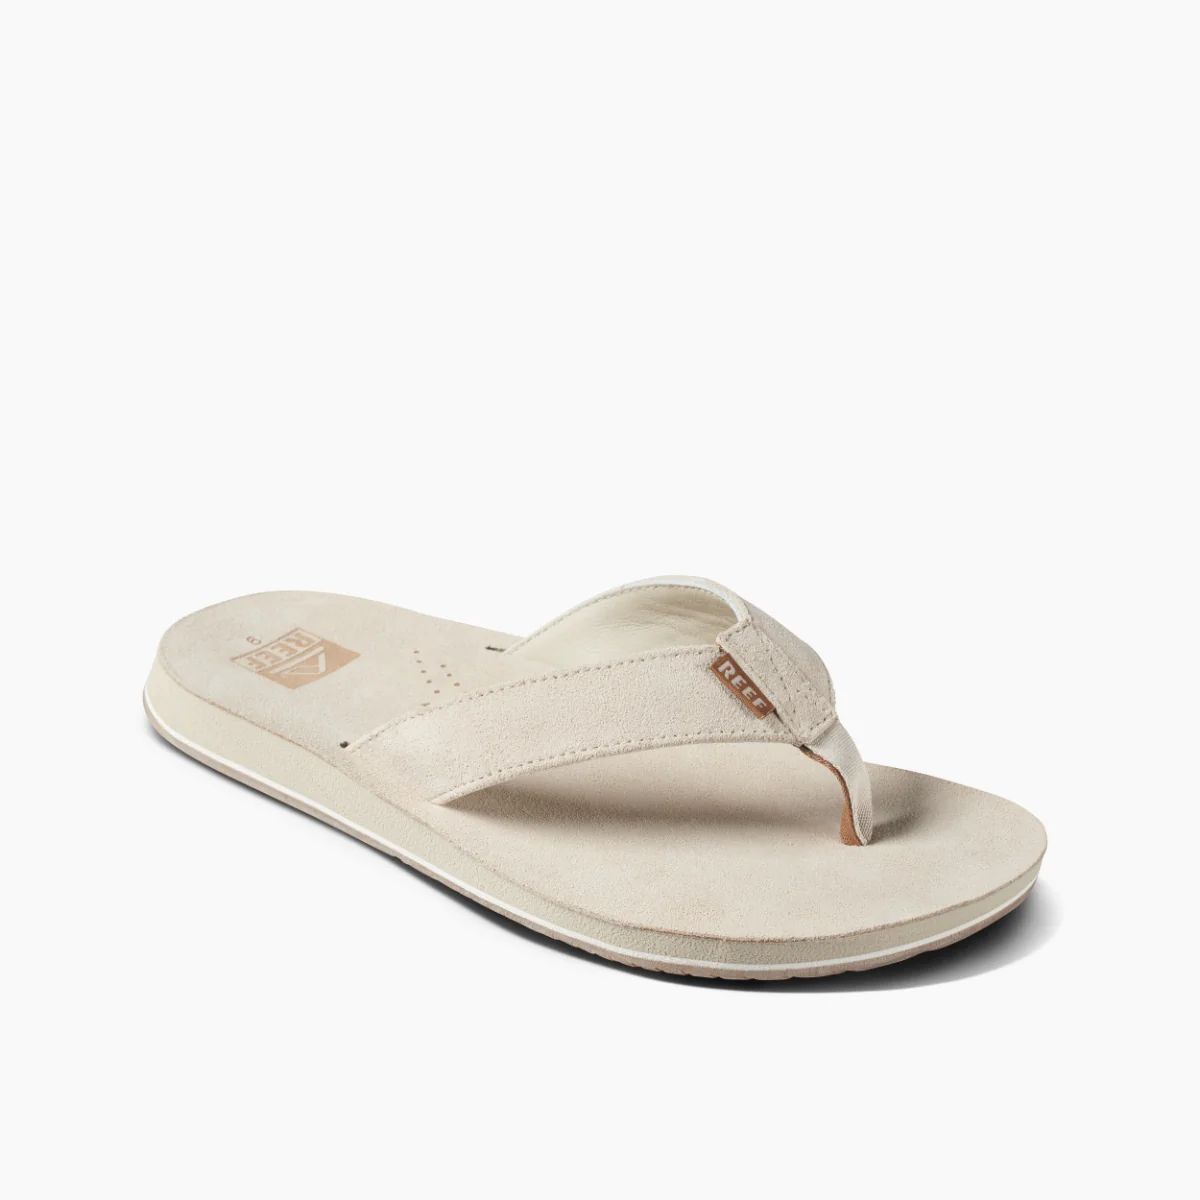 Men's Drift Classic Leather Sandals | REEF® | Reef